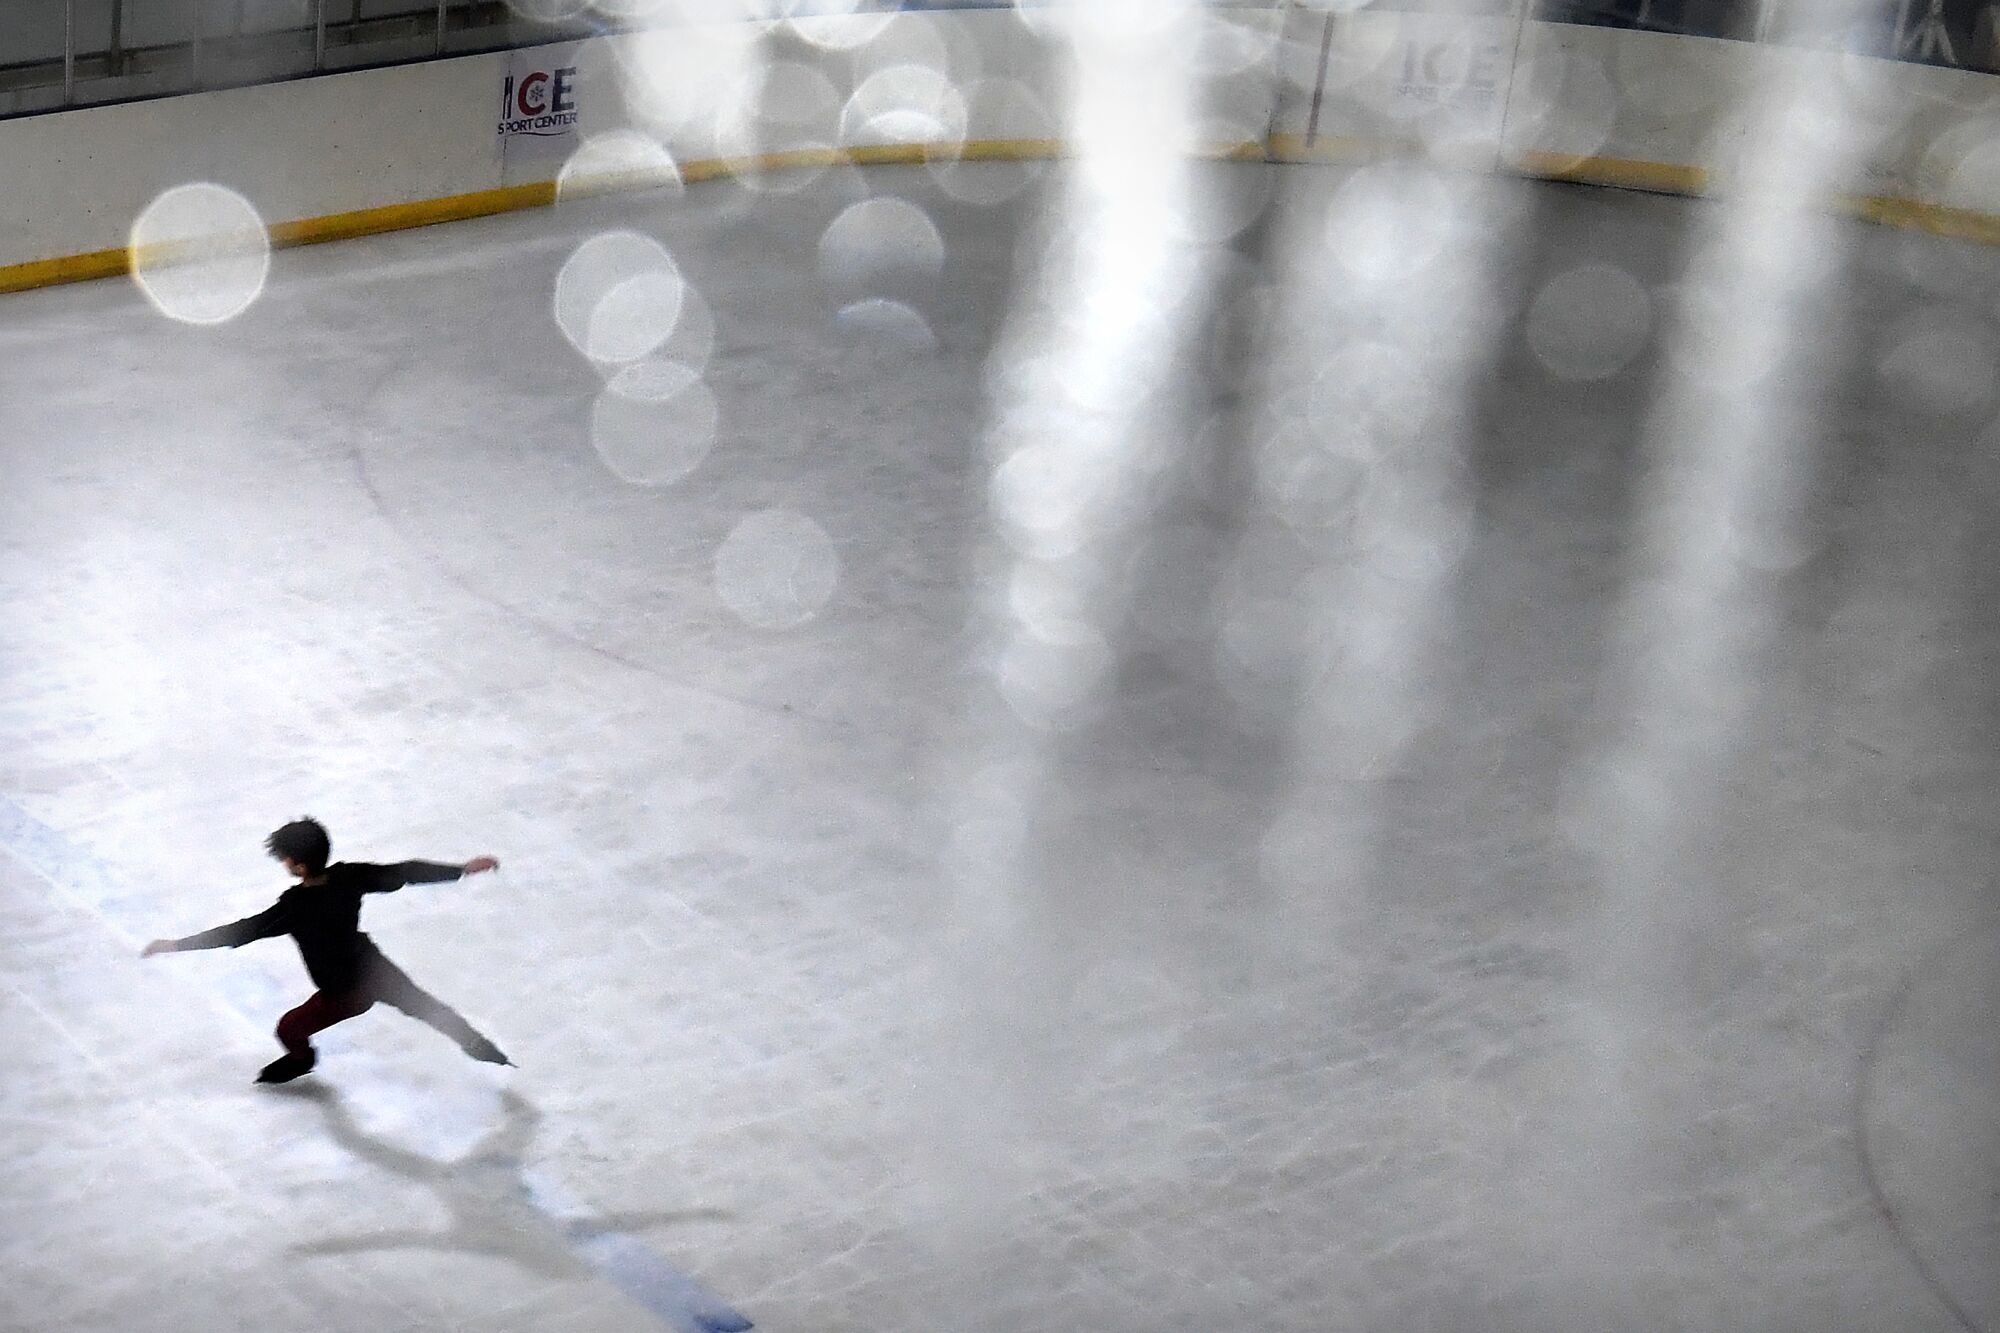 Mexican figure skater Donovan Carrillo practices at an ice rink in a shopping mall.